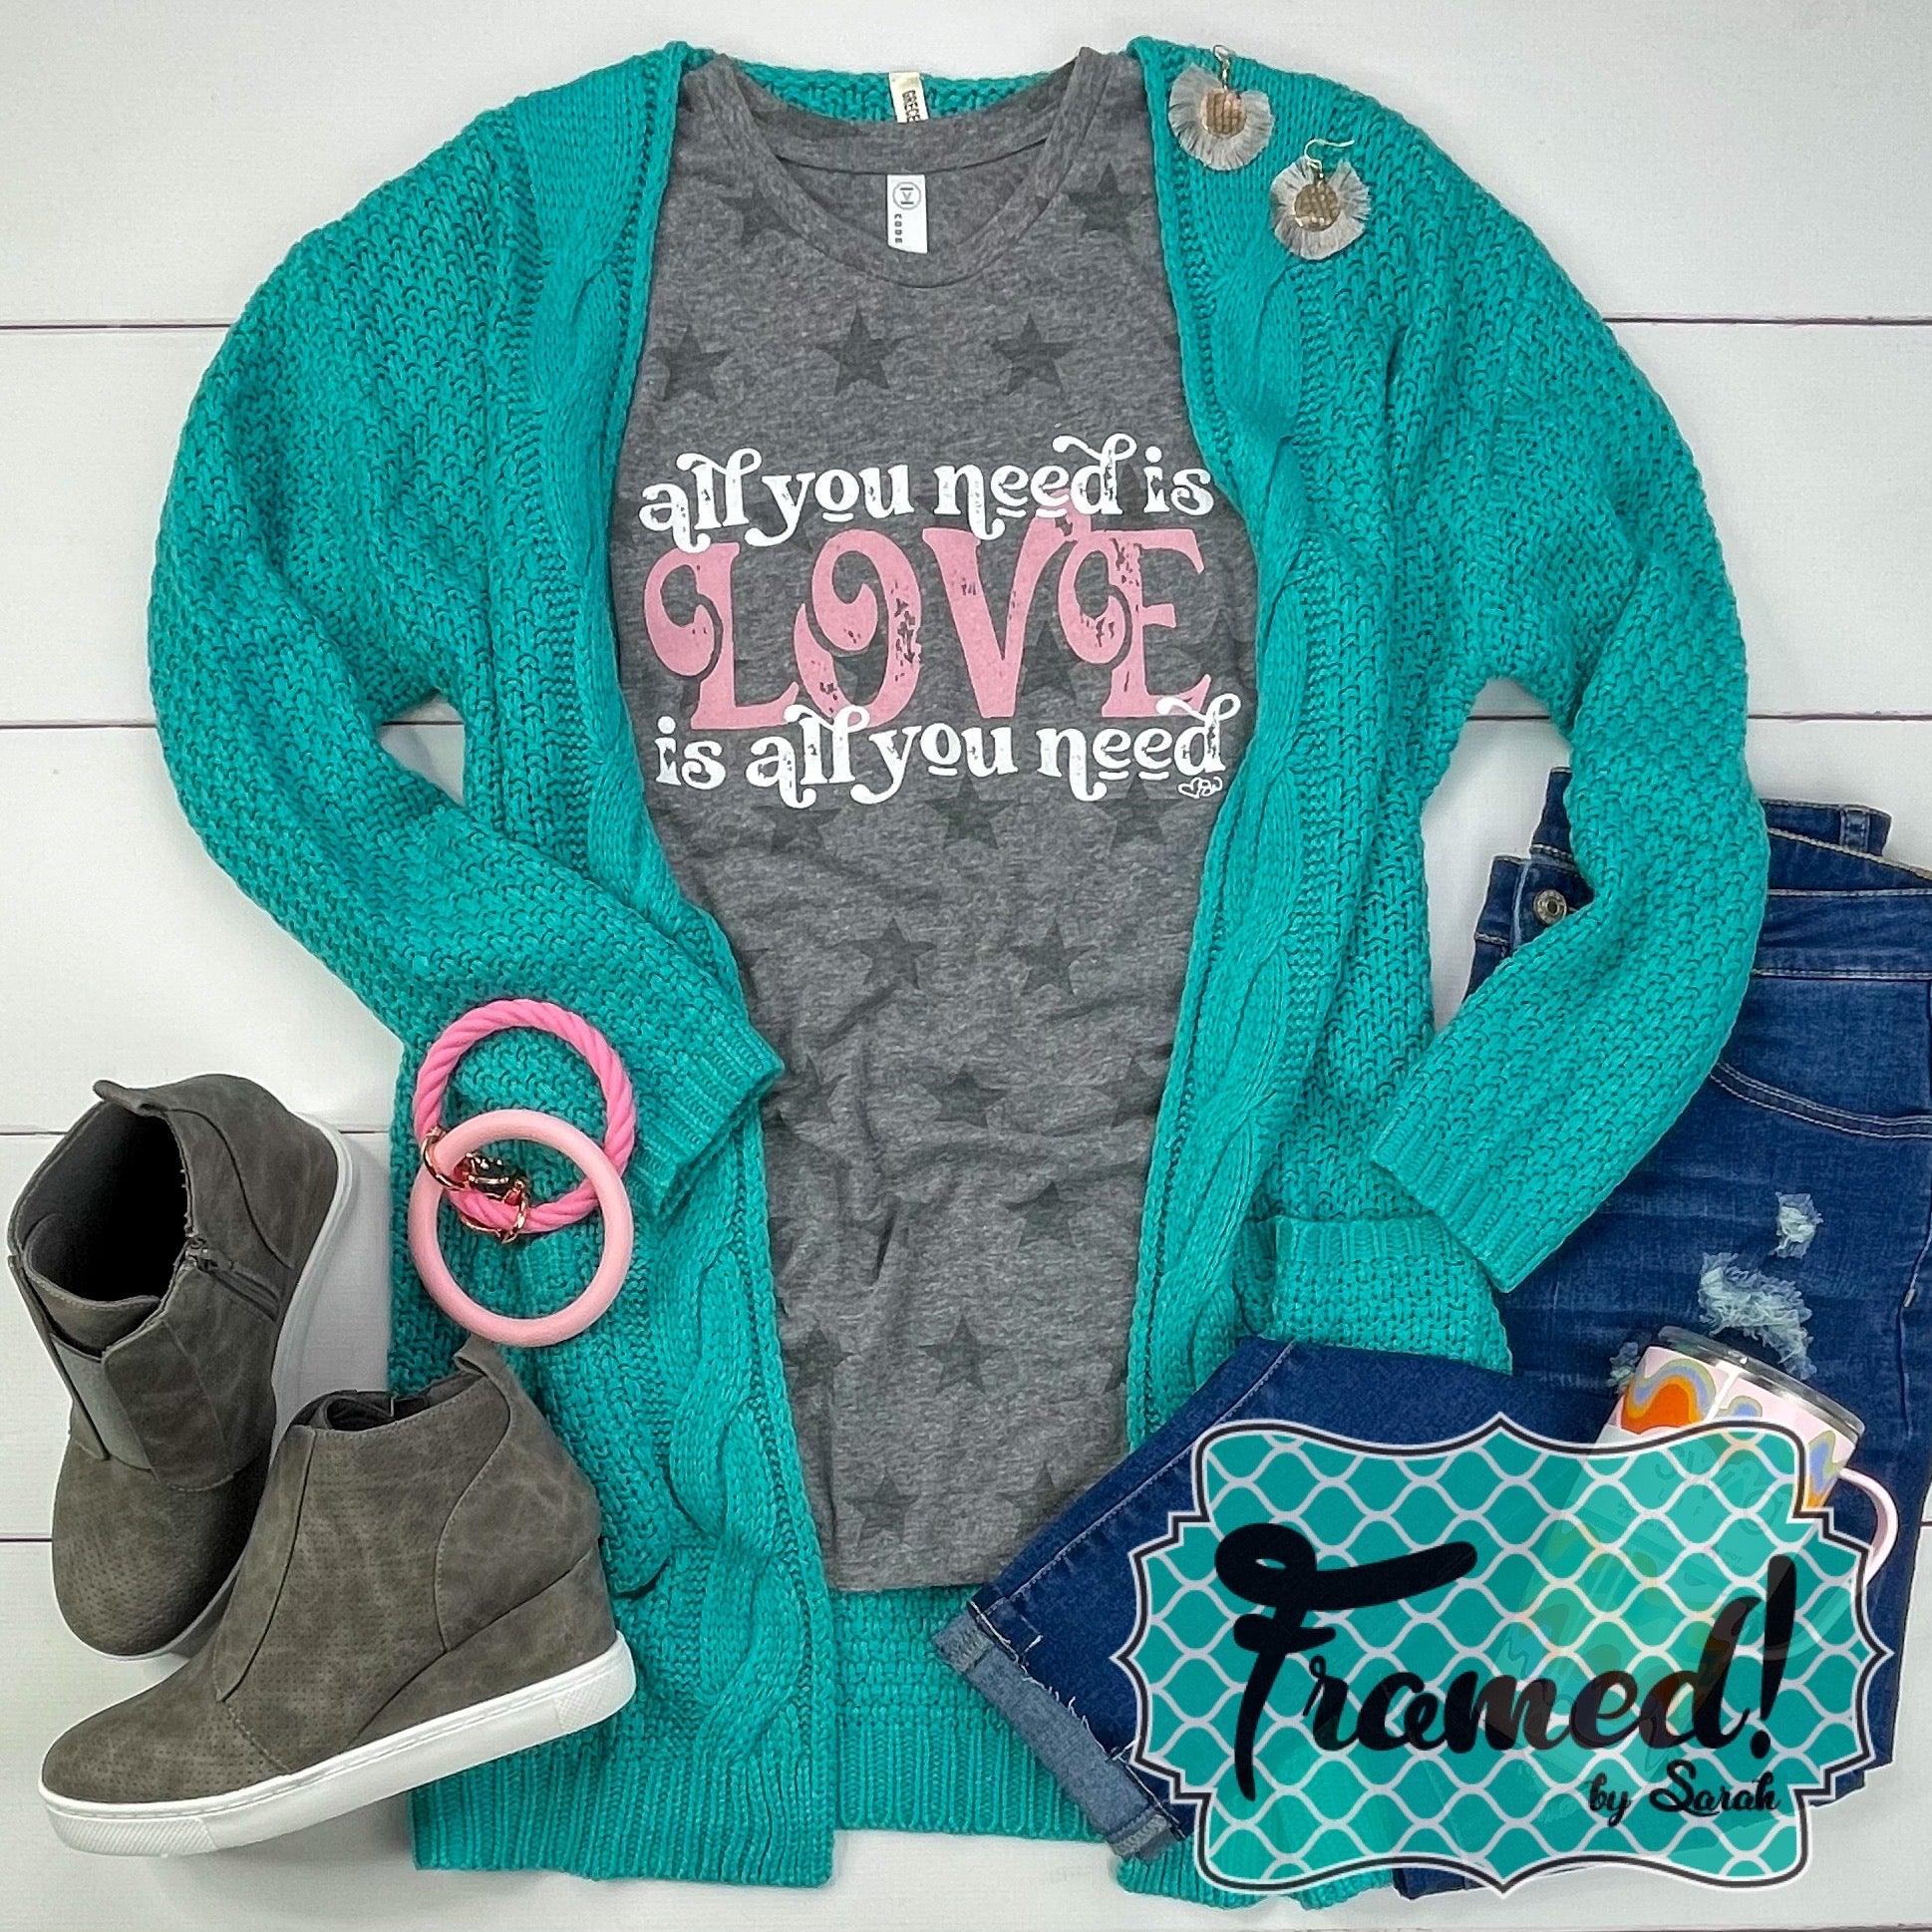 All You Need Is Love Star Tee (Sm, Md & XL only)